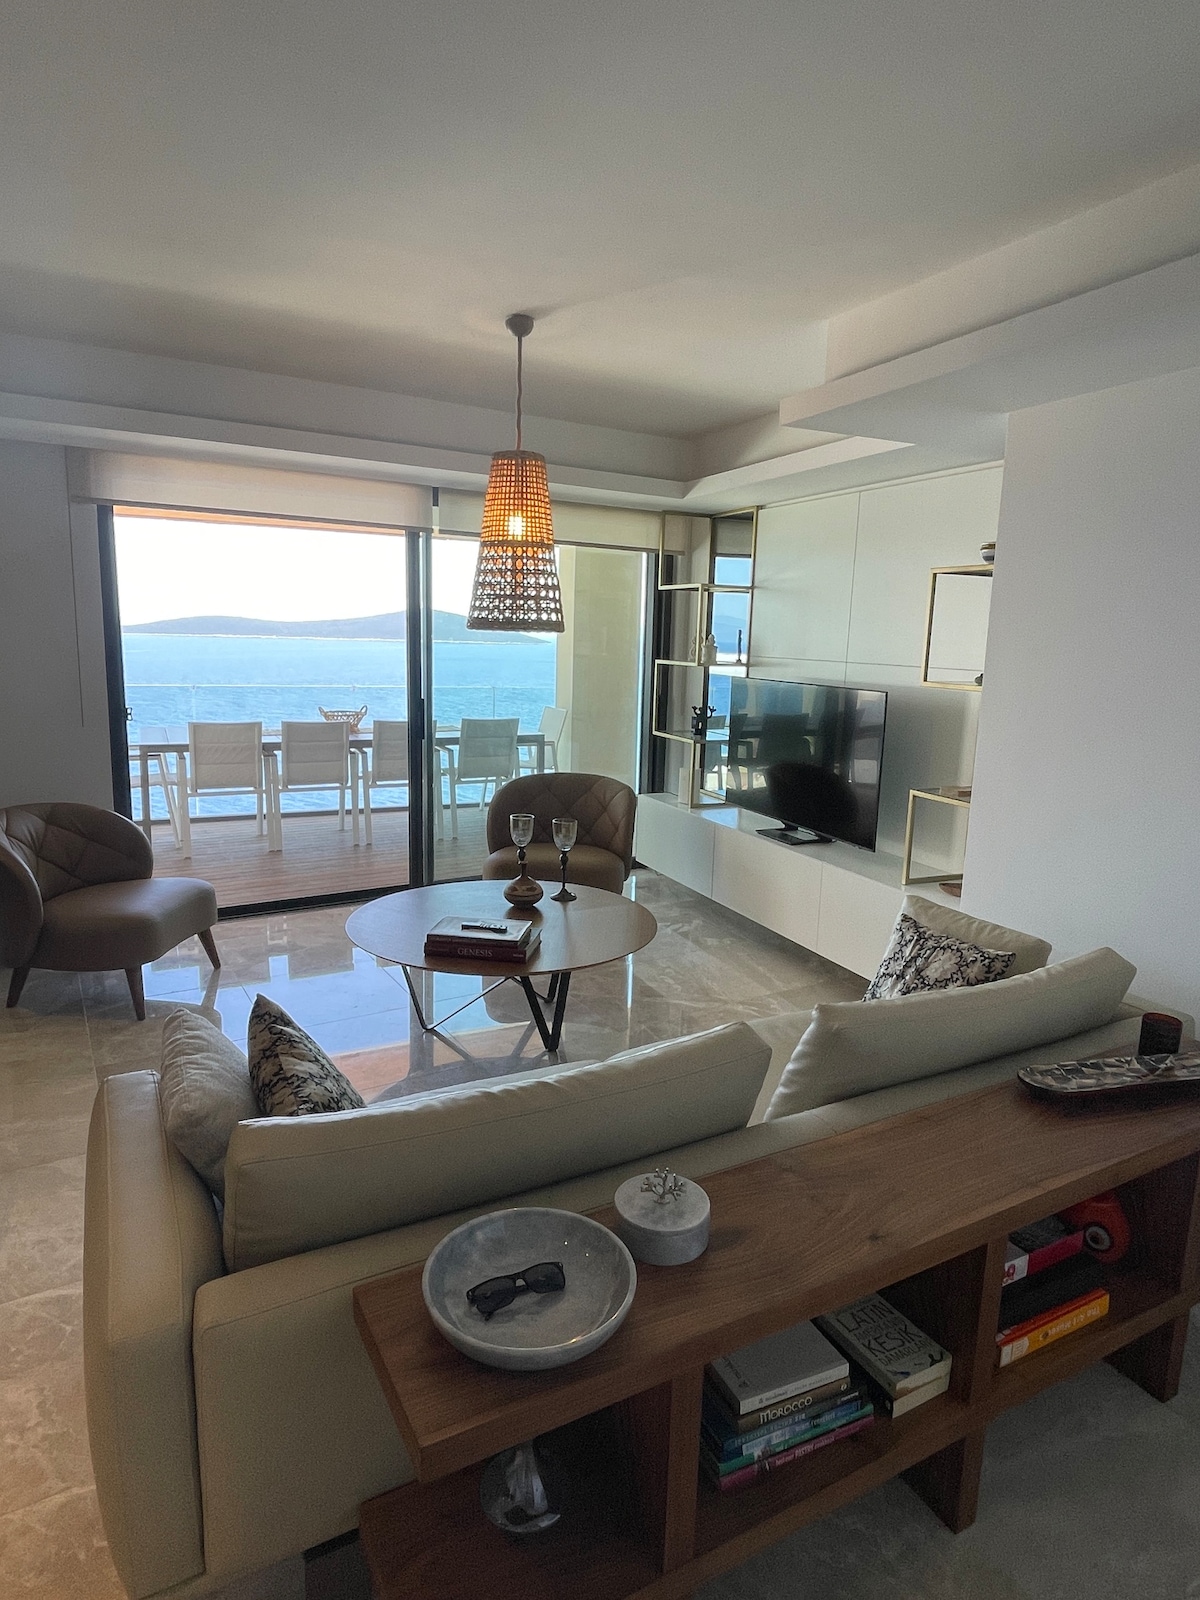 Luxury 2-bed 2-bath with private beach club access